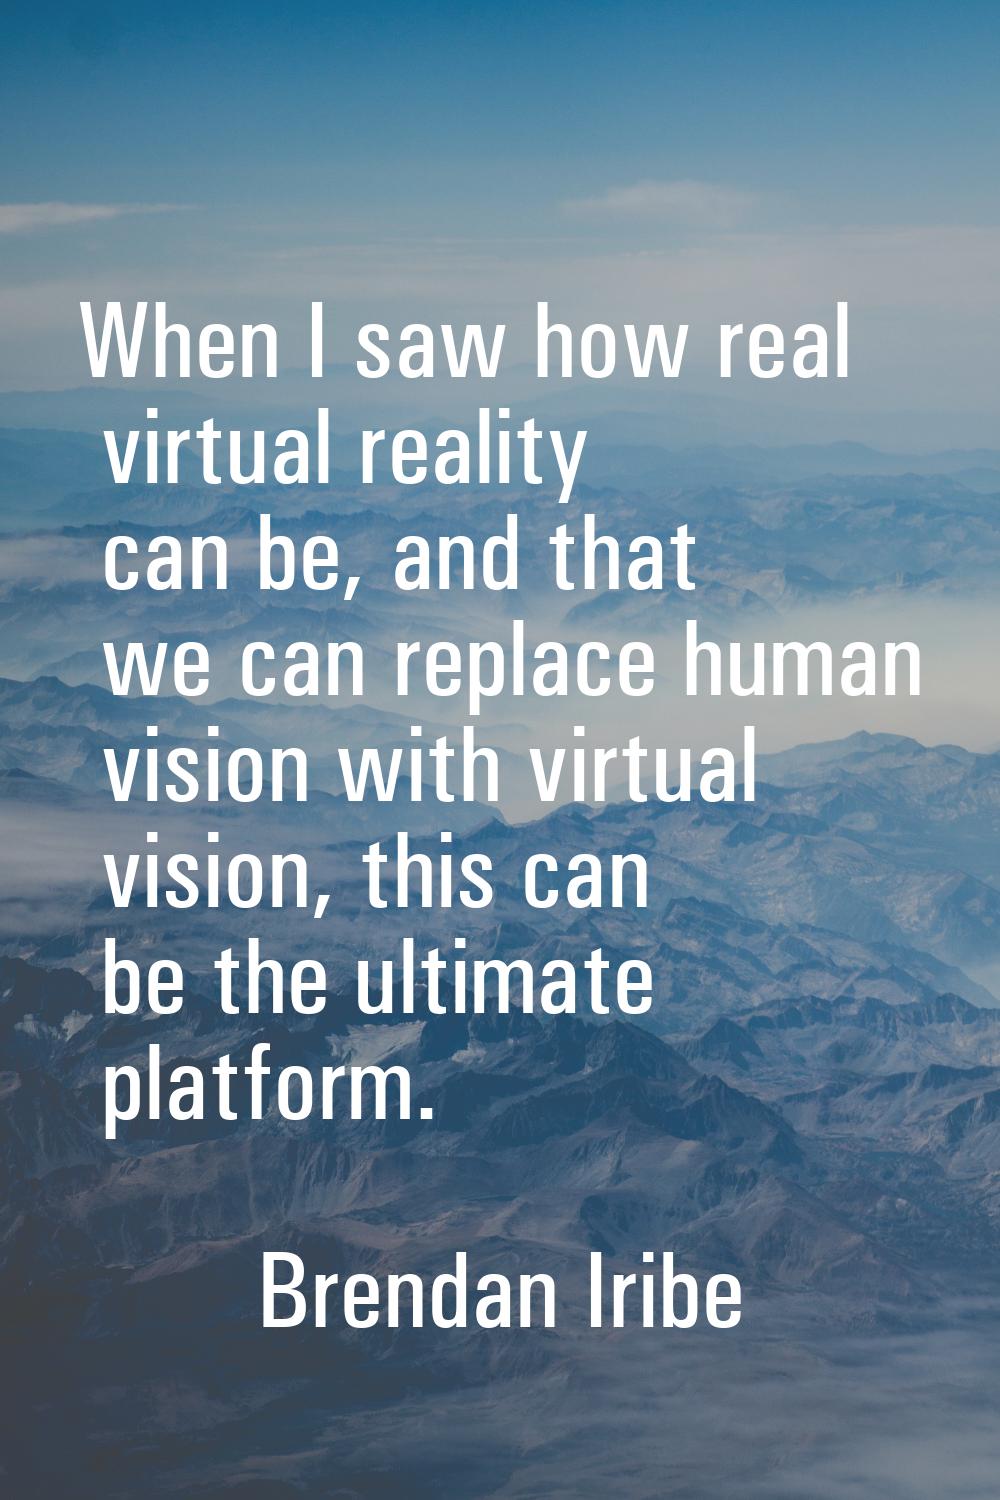 When I saw how real virtual reality can be, and that we can replace human vision with virtual visio